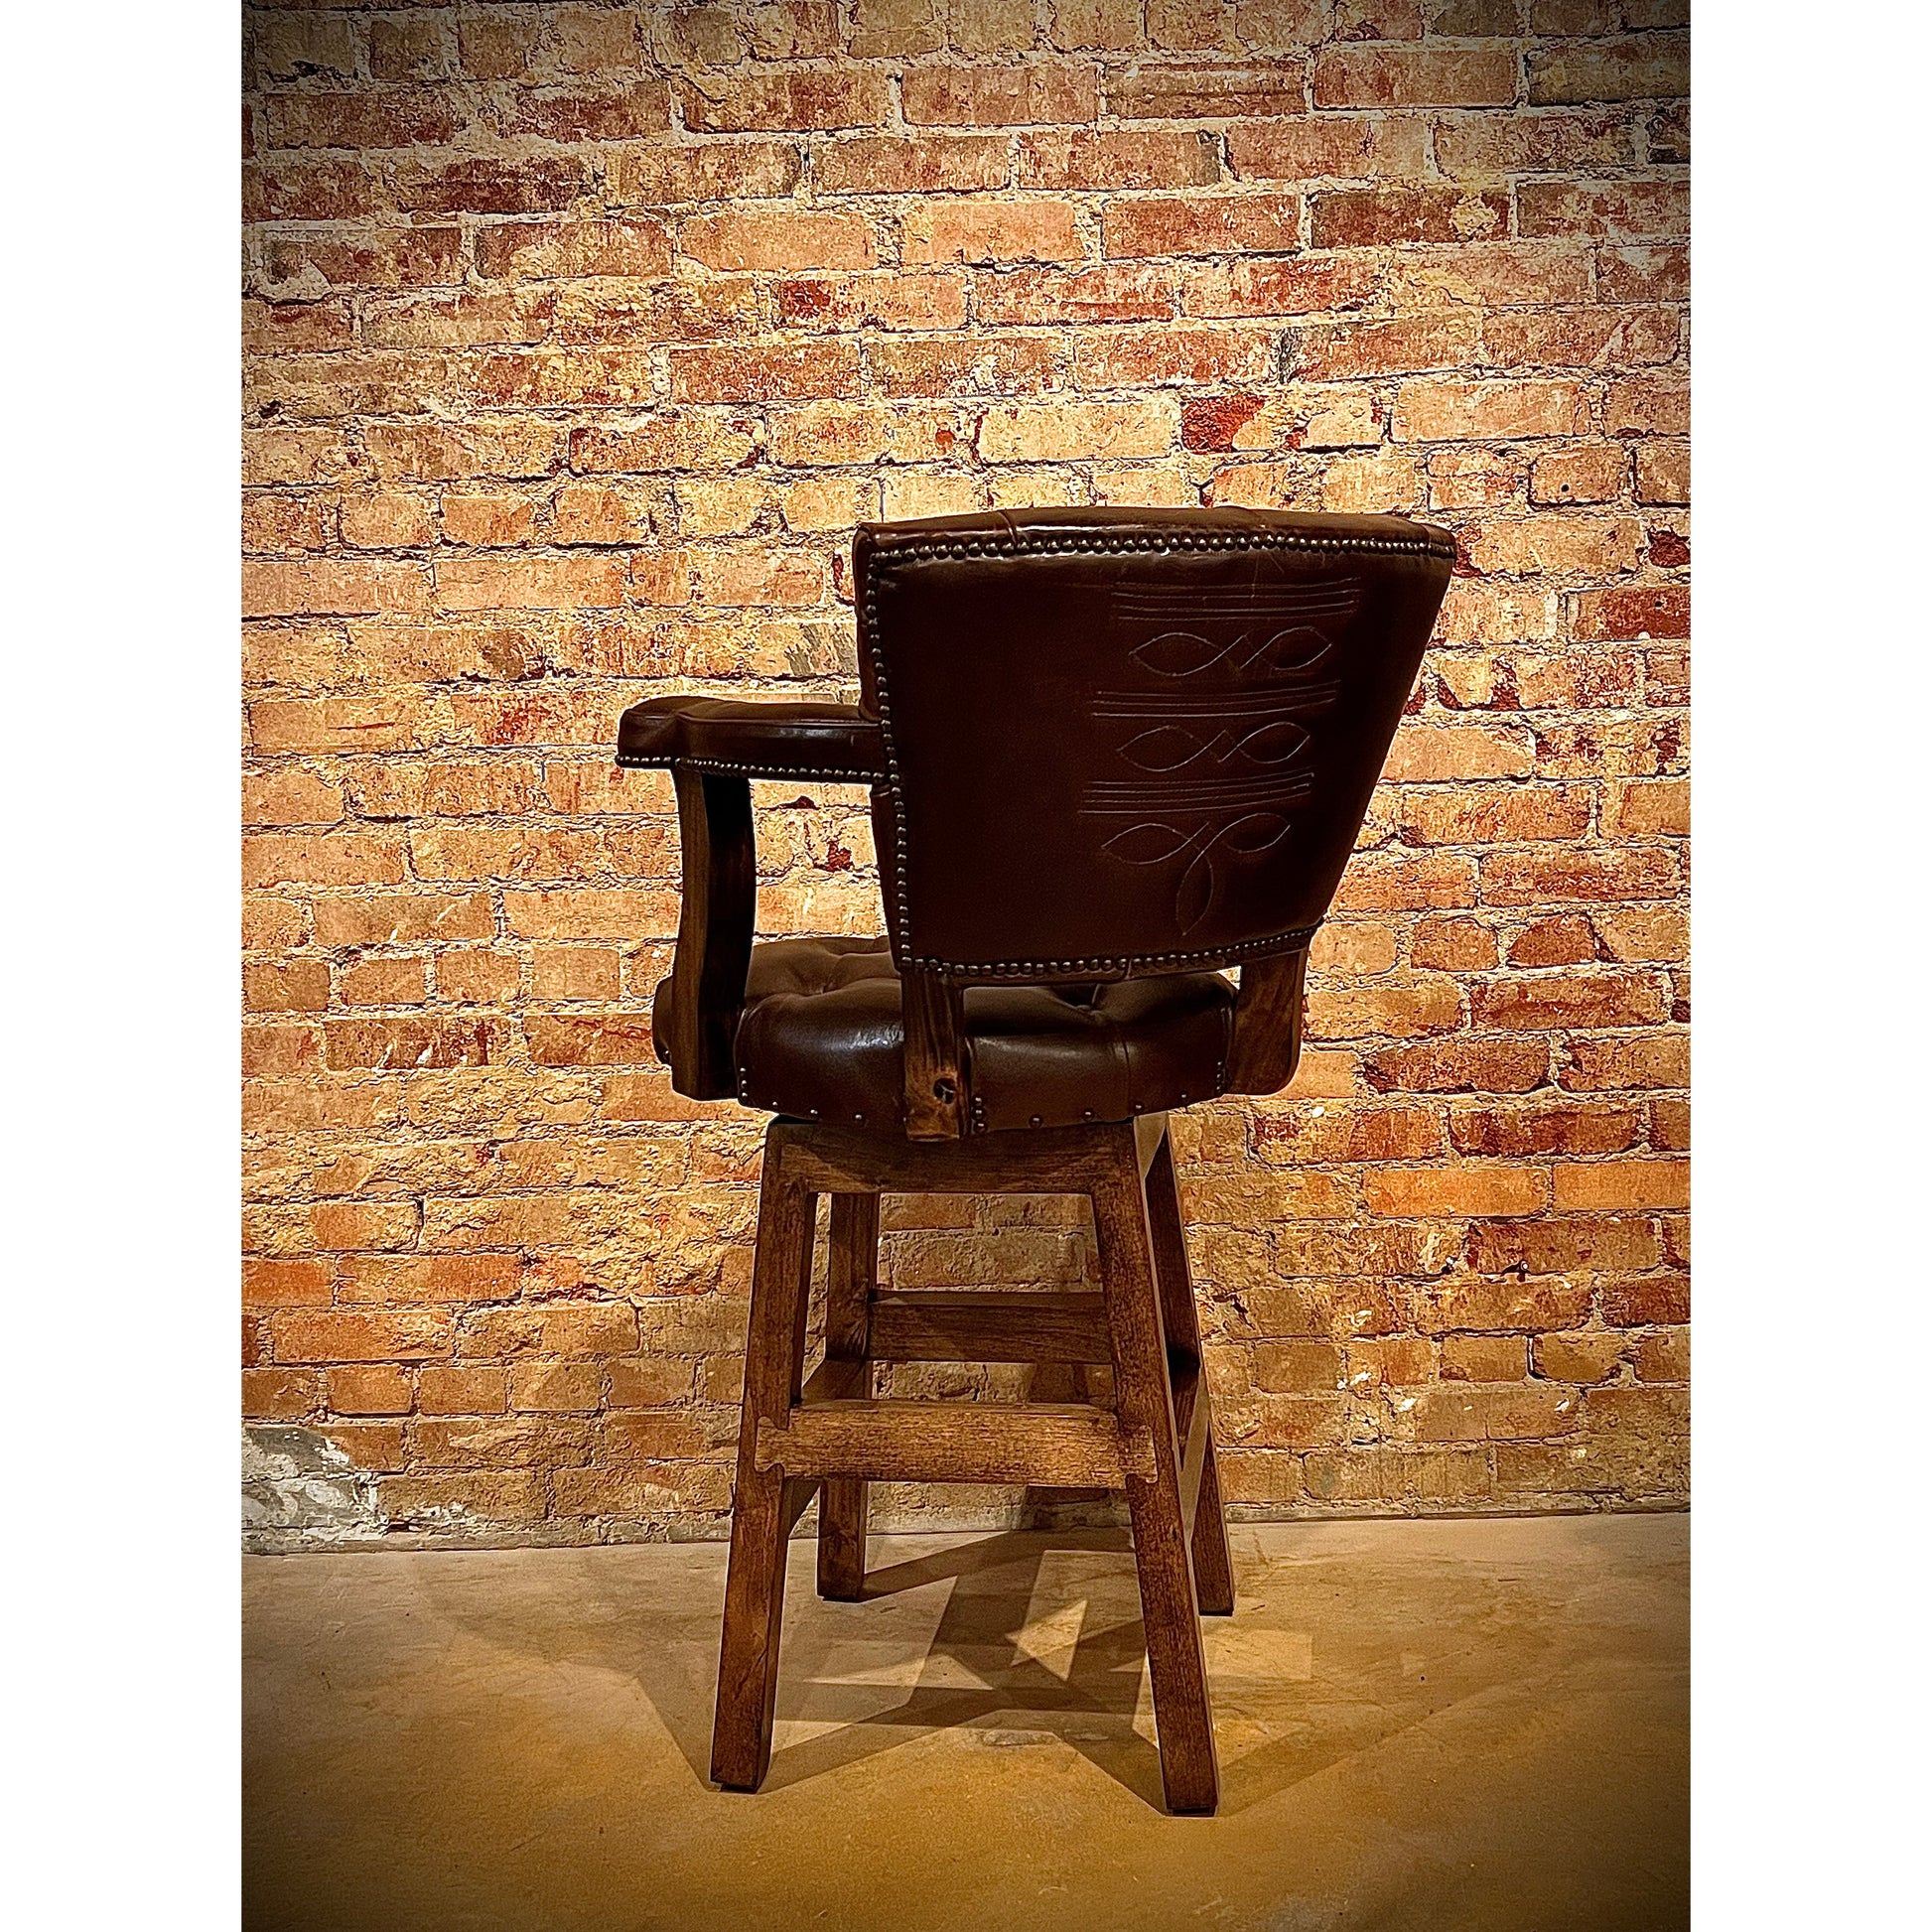 Elevate your seating experience with our Tufted Boot Stitch Chisum Barstool. The tufted seat and back provide both style and comfort, while the swivel feature allows for easy movement. The boot stitch on the outside back panel adds a touch of Western. Expertly crafted for a comfortable and stylish addition to any space.